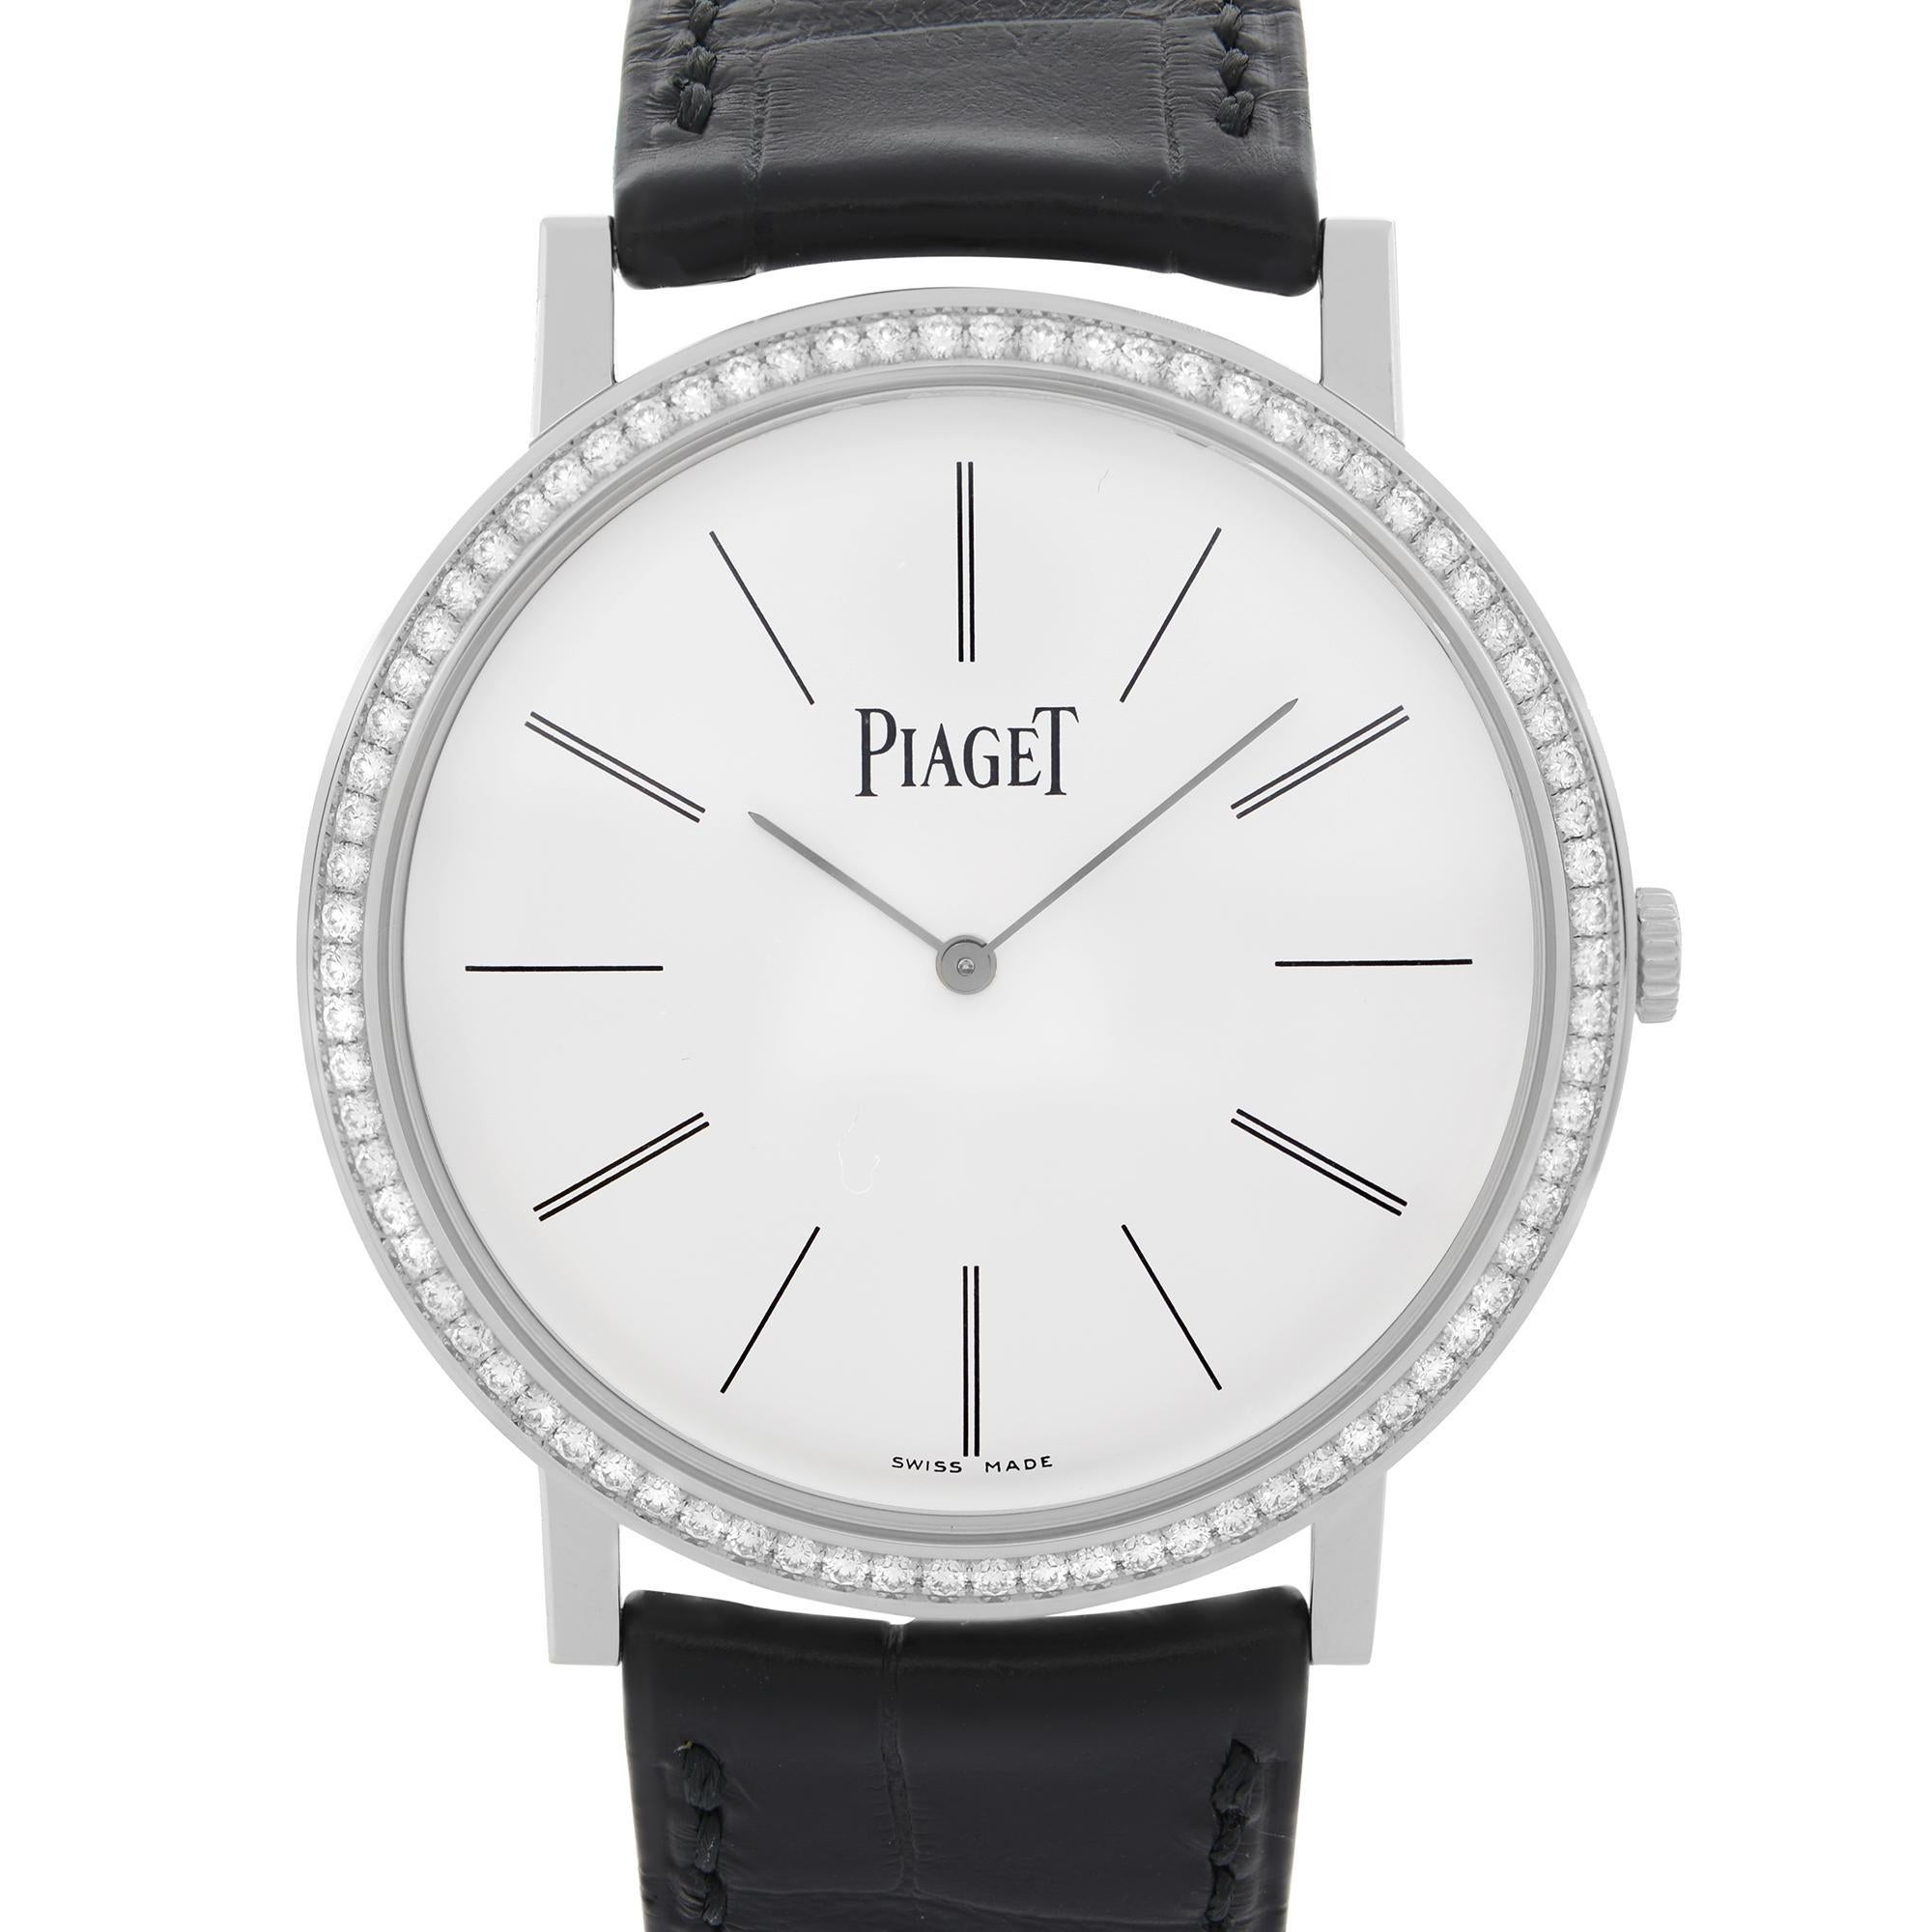 Unworn Piaget Altiplano Mechanical Unisex Watch G0A29165. This Timepiece is Powered by a Mechanical (Manuel) Movement and Features: 18k White Gold Case with a Black Leather Strap, 78 brilliant-cut diamonds (approx. 0.7 ct) on the bezel, Silver Dial